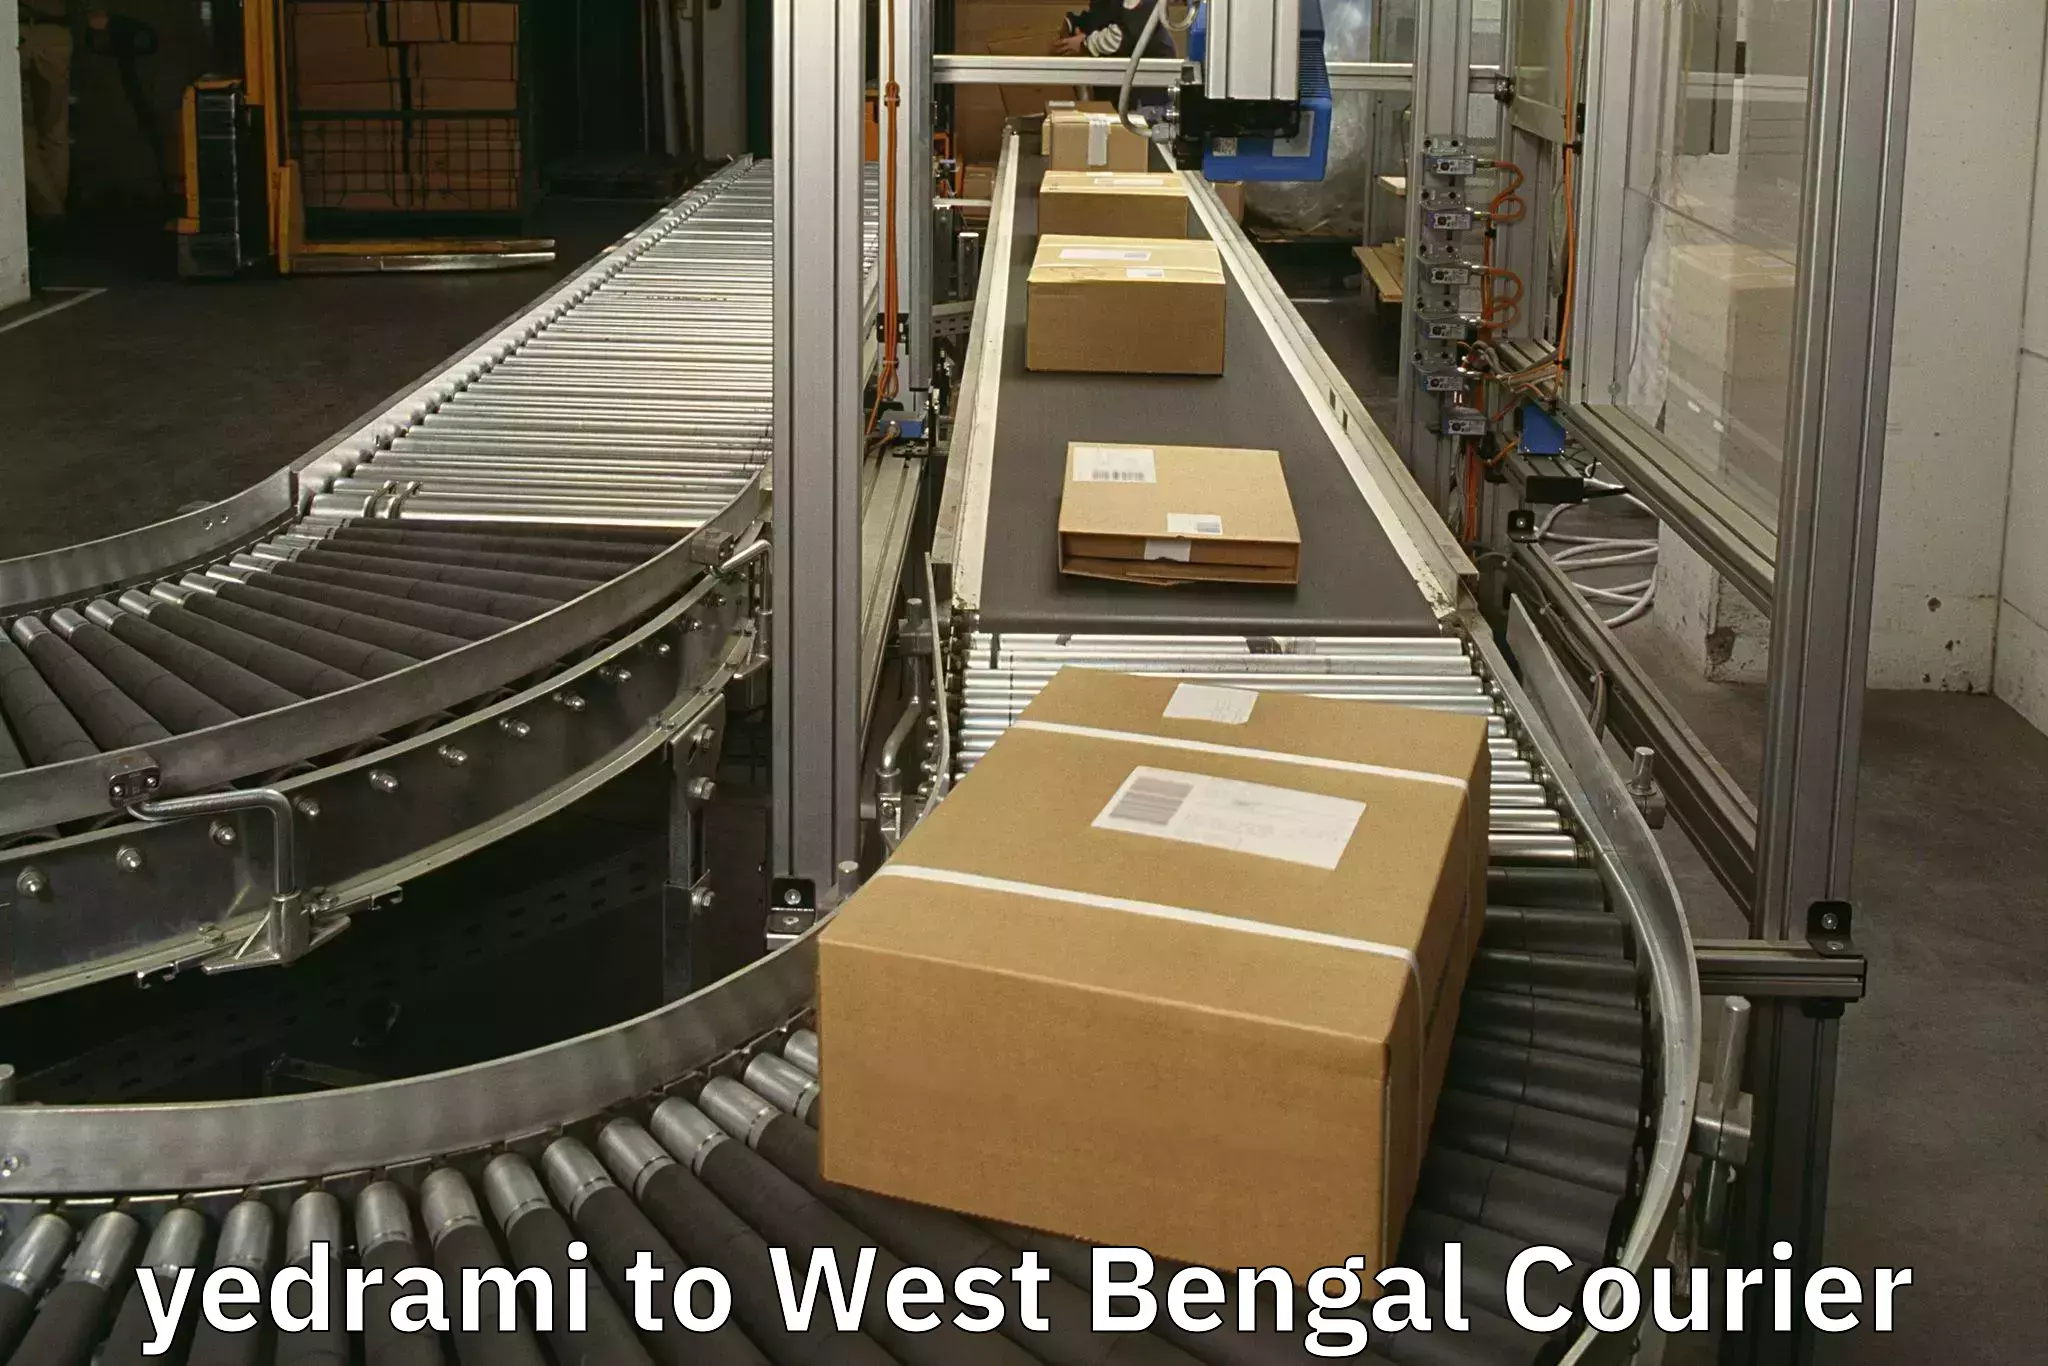 Baggage shipping service yedrami to West Bengal